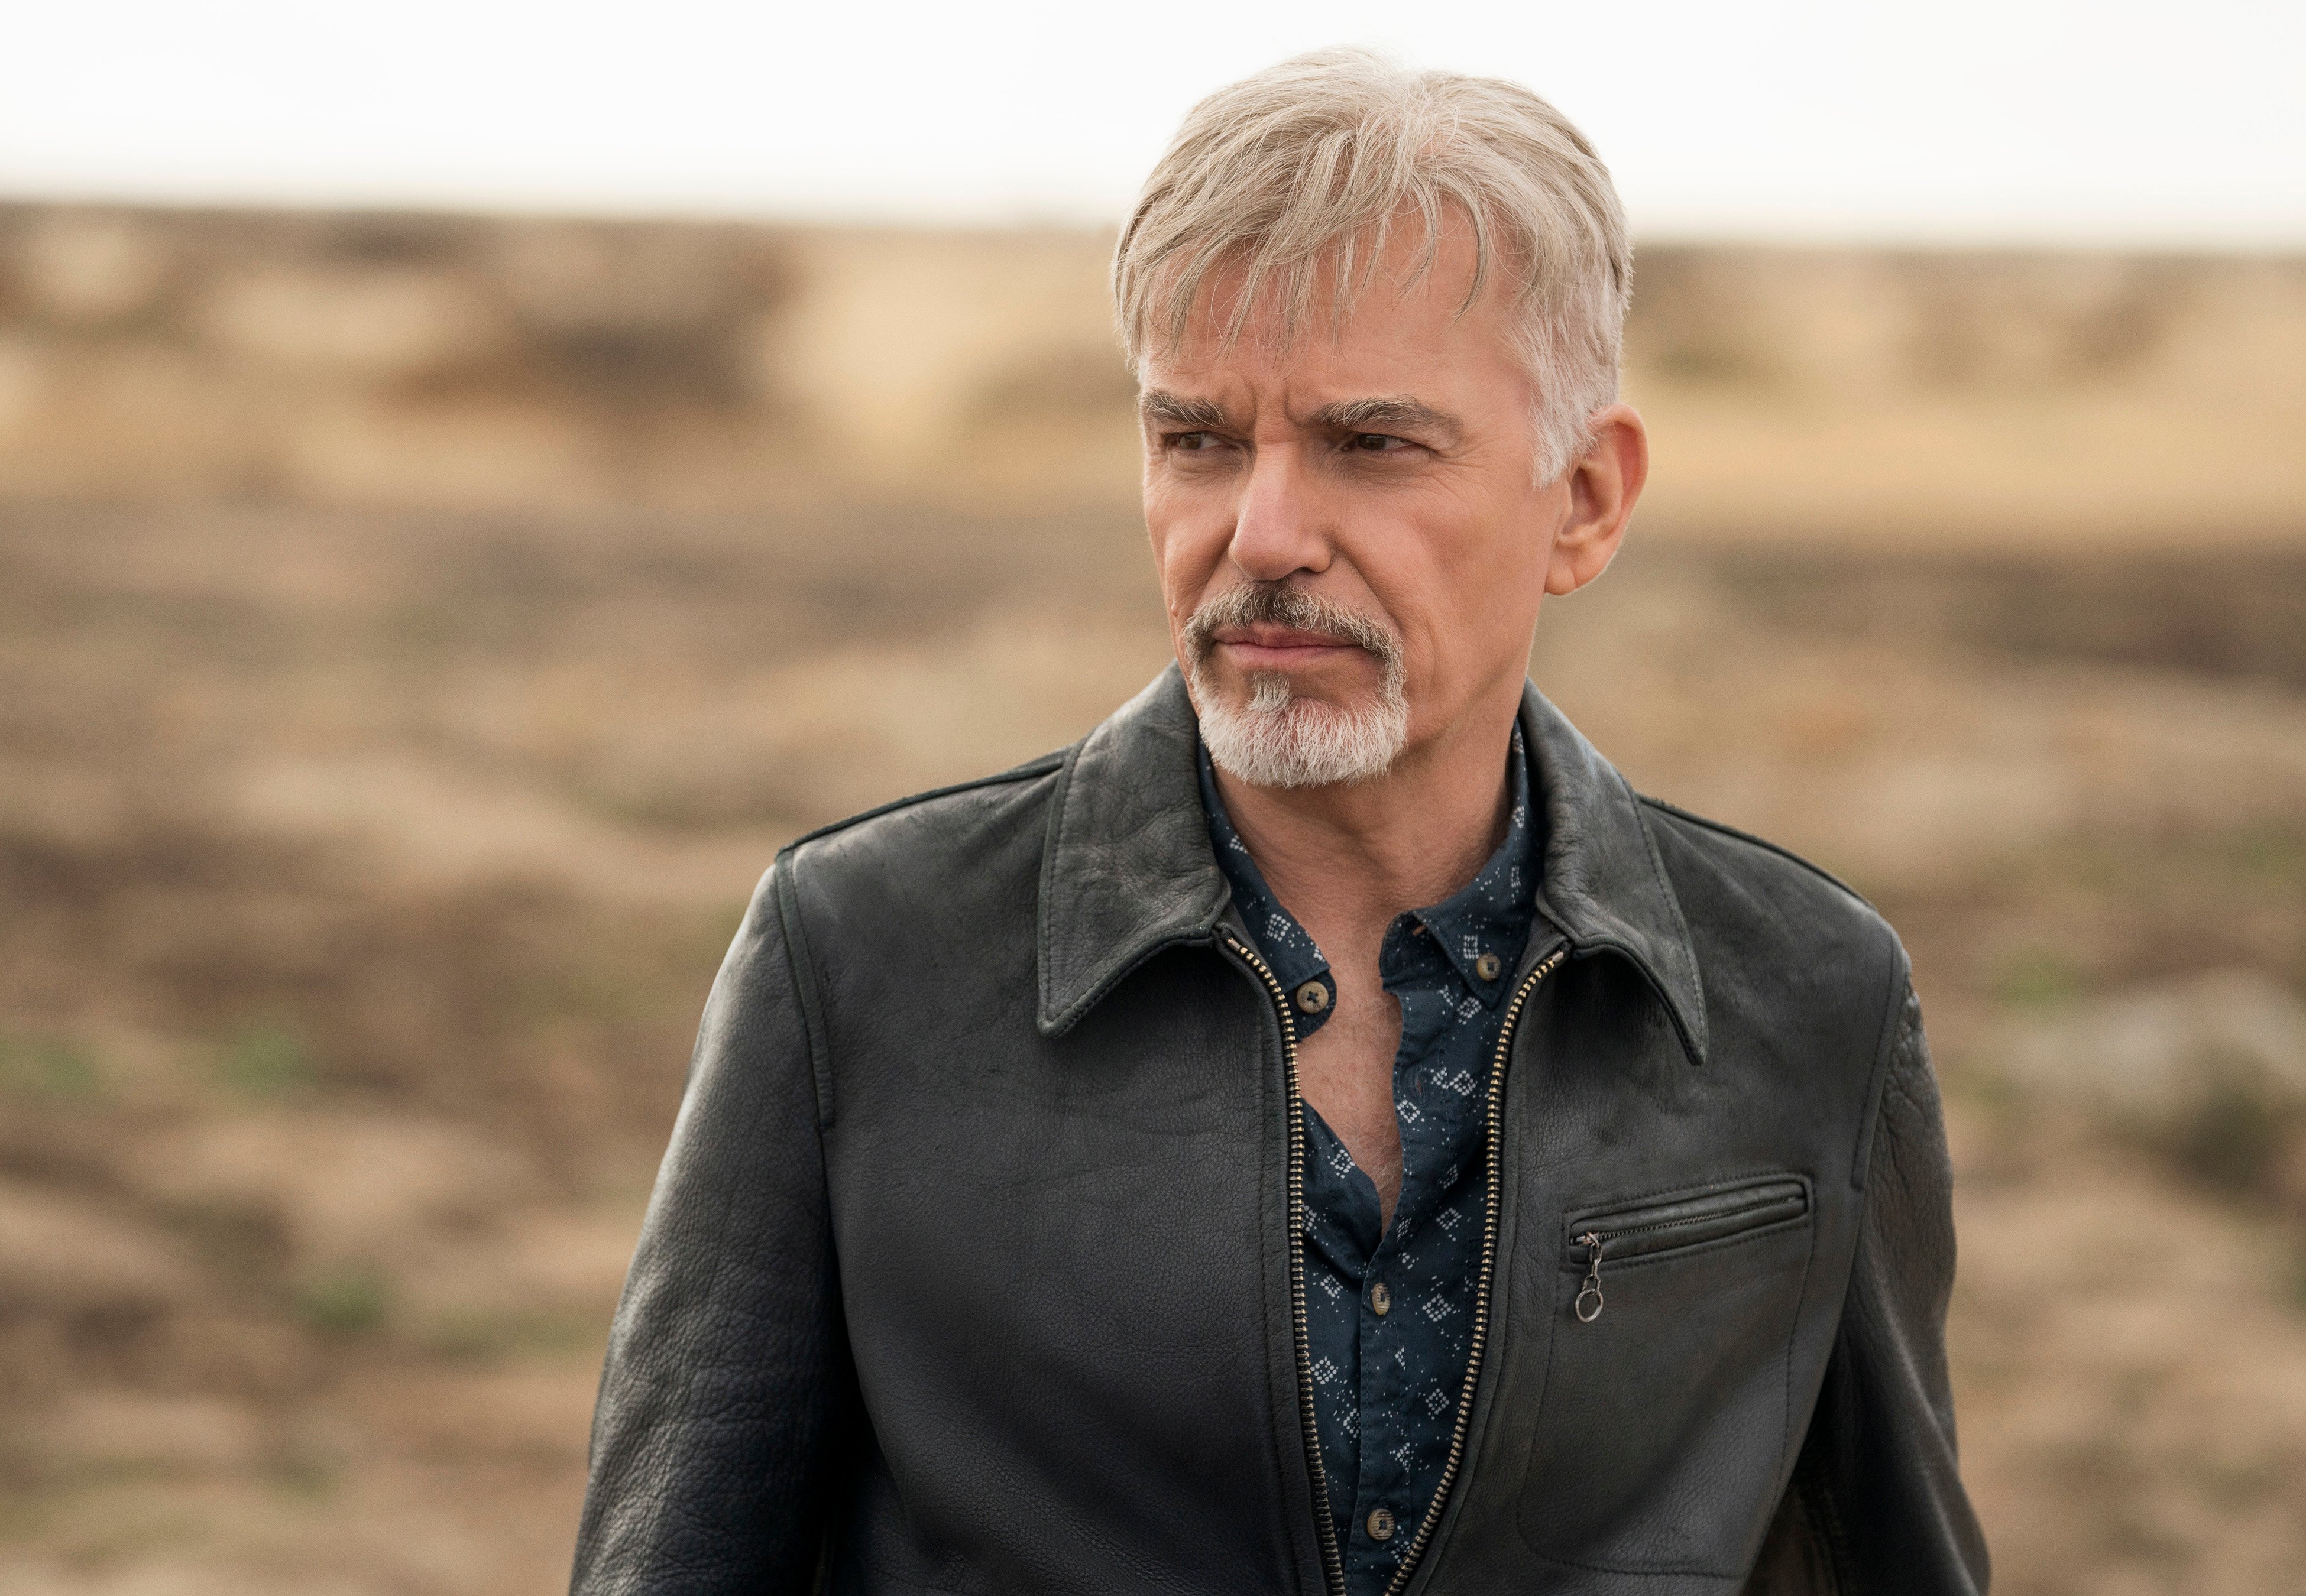 Billy Bob Thornton, wearing a leather jacket, as Billy McBride in 'Goliath'